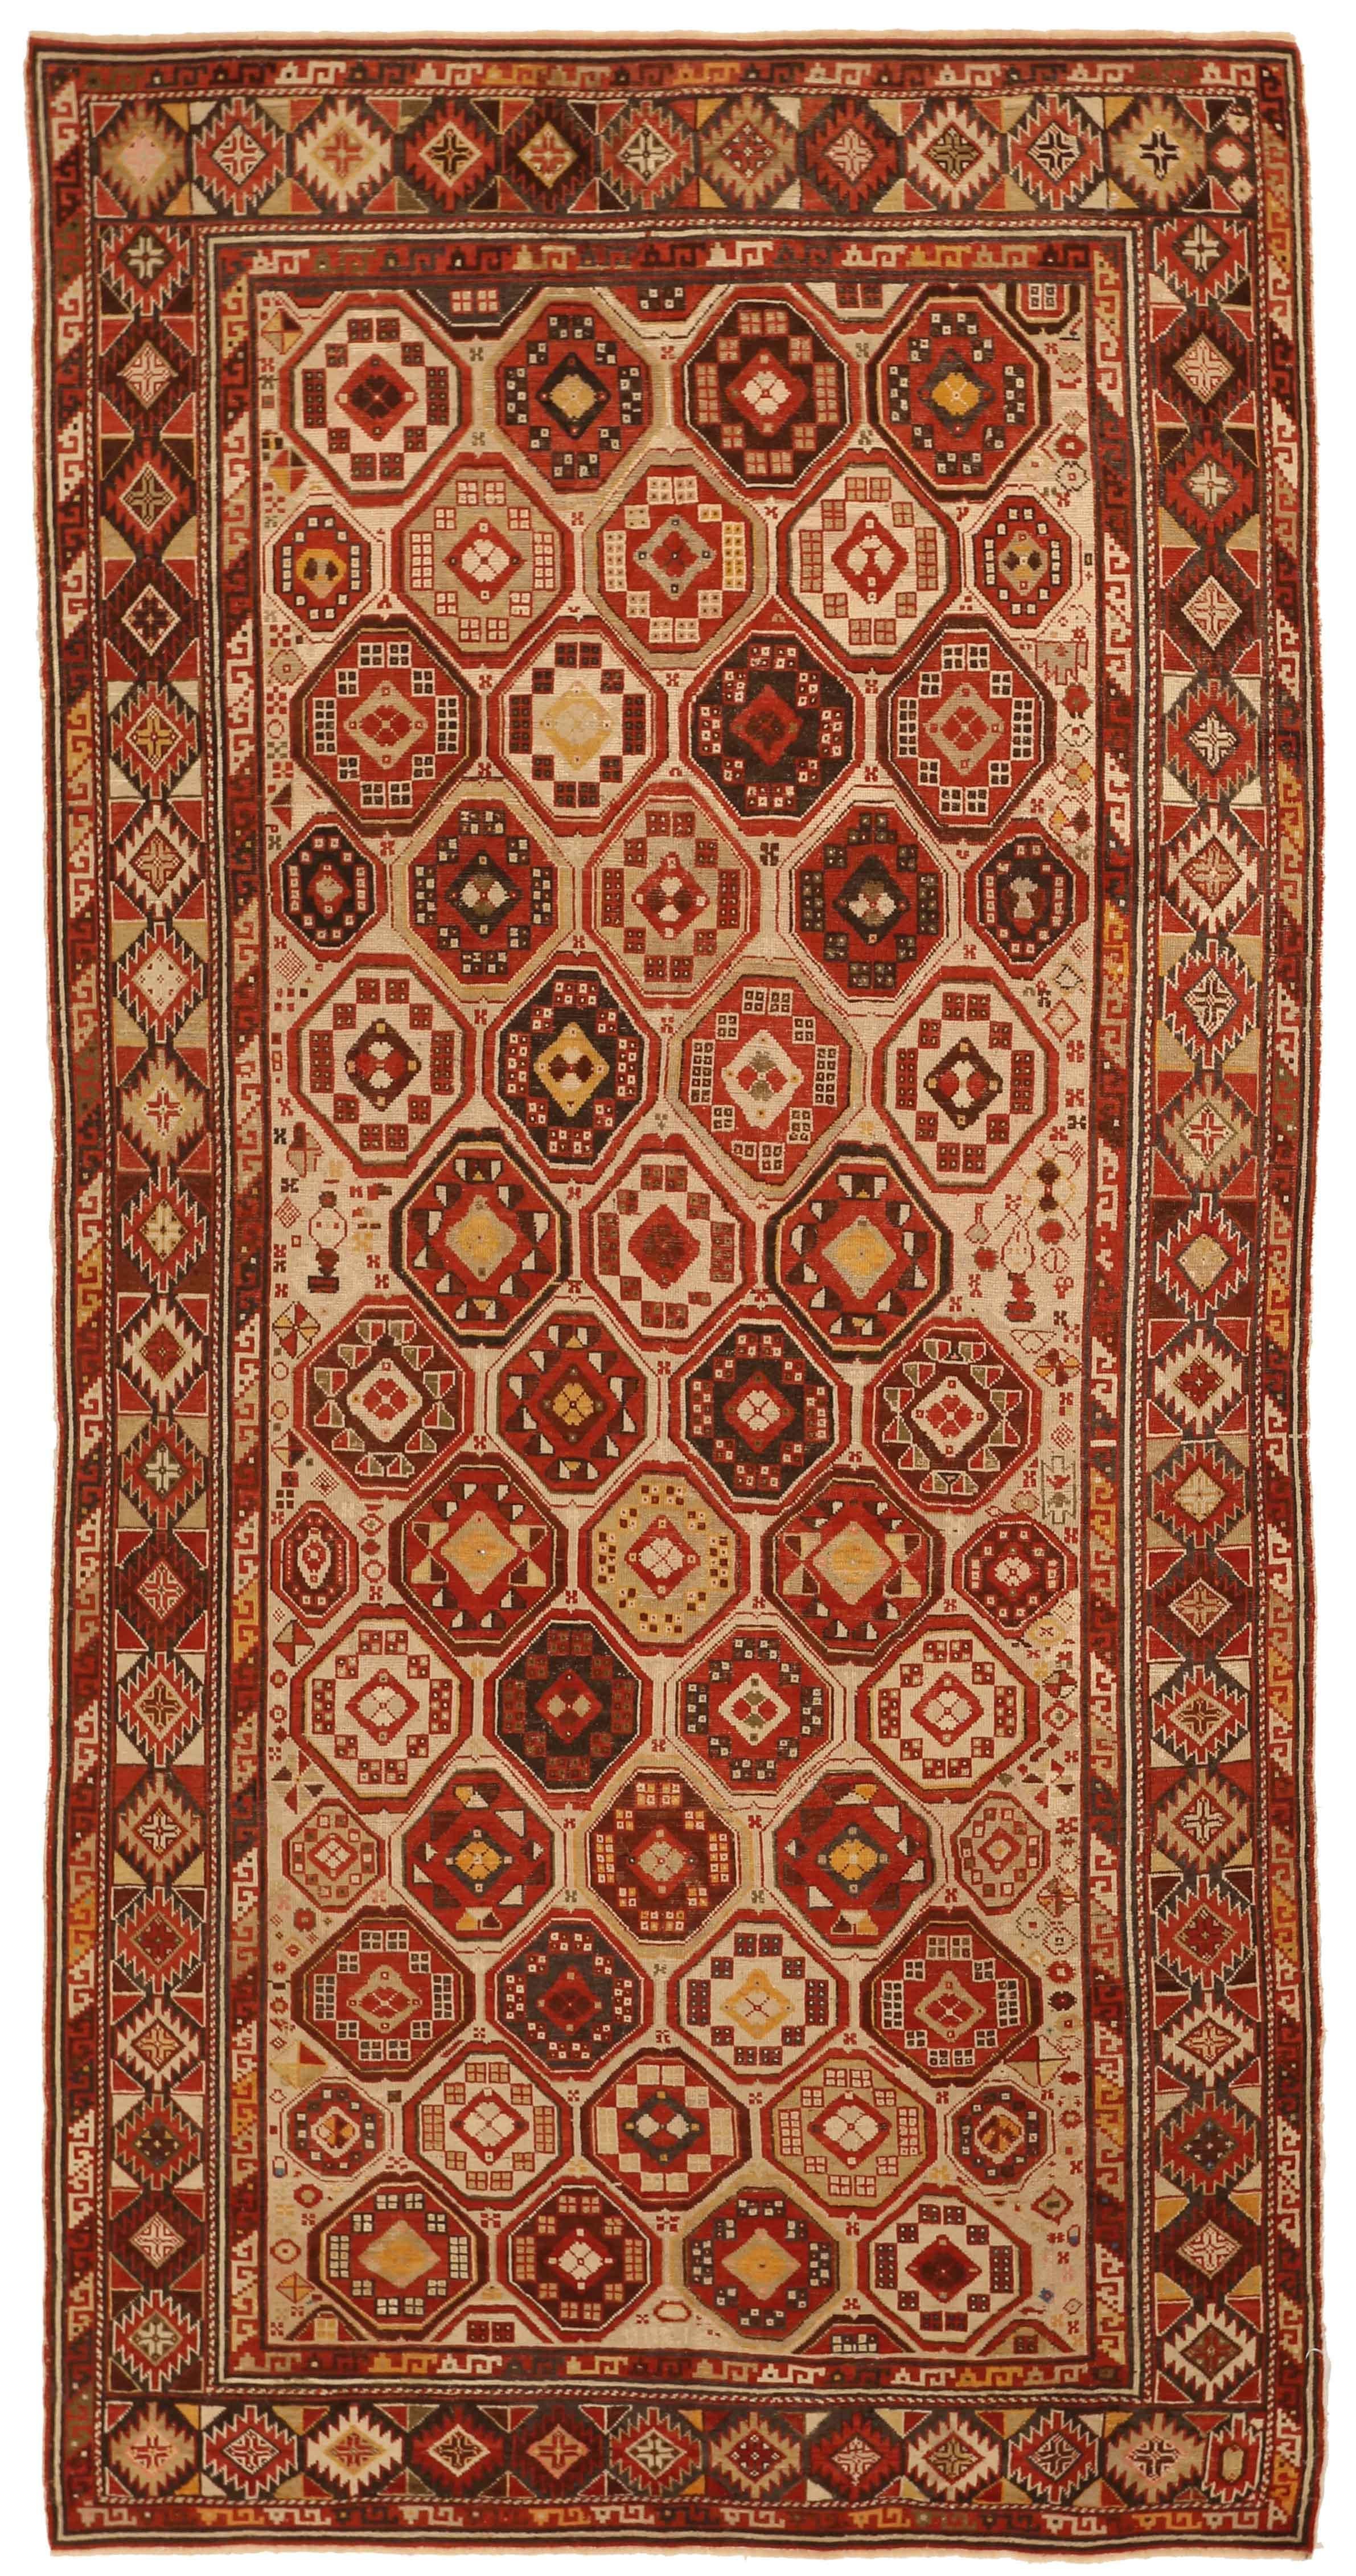 Handwoven using the highest quality wool, this Shirvan design antique Russian rug features octagons and diamond figures in various iterations. Using a bold mix of red, beige, and brown, it’s a rug created for spaces with contemporary and traditional